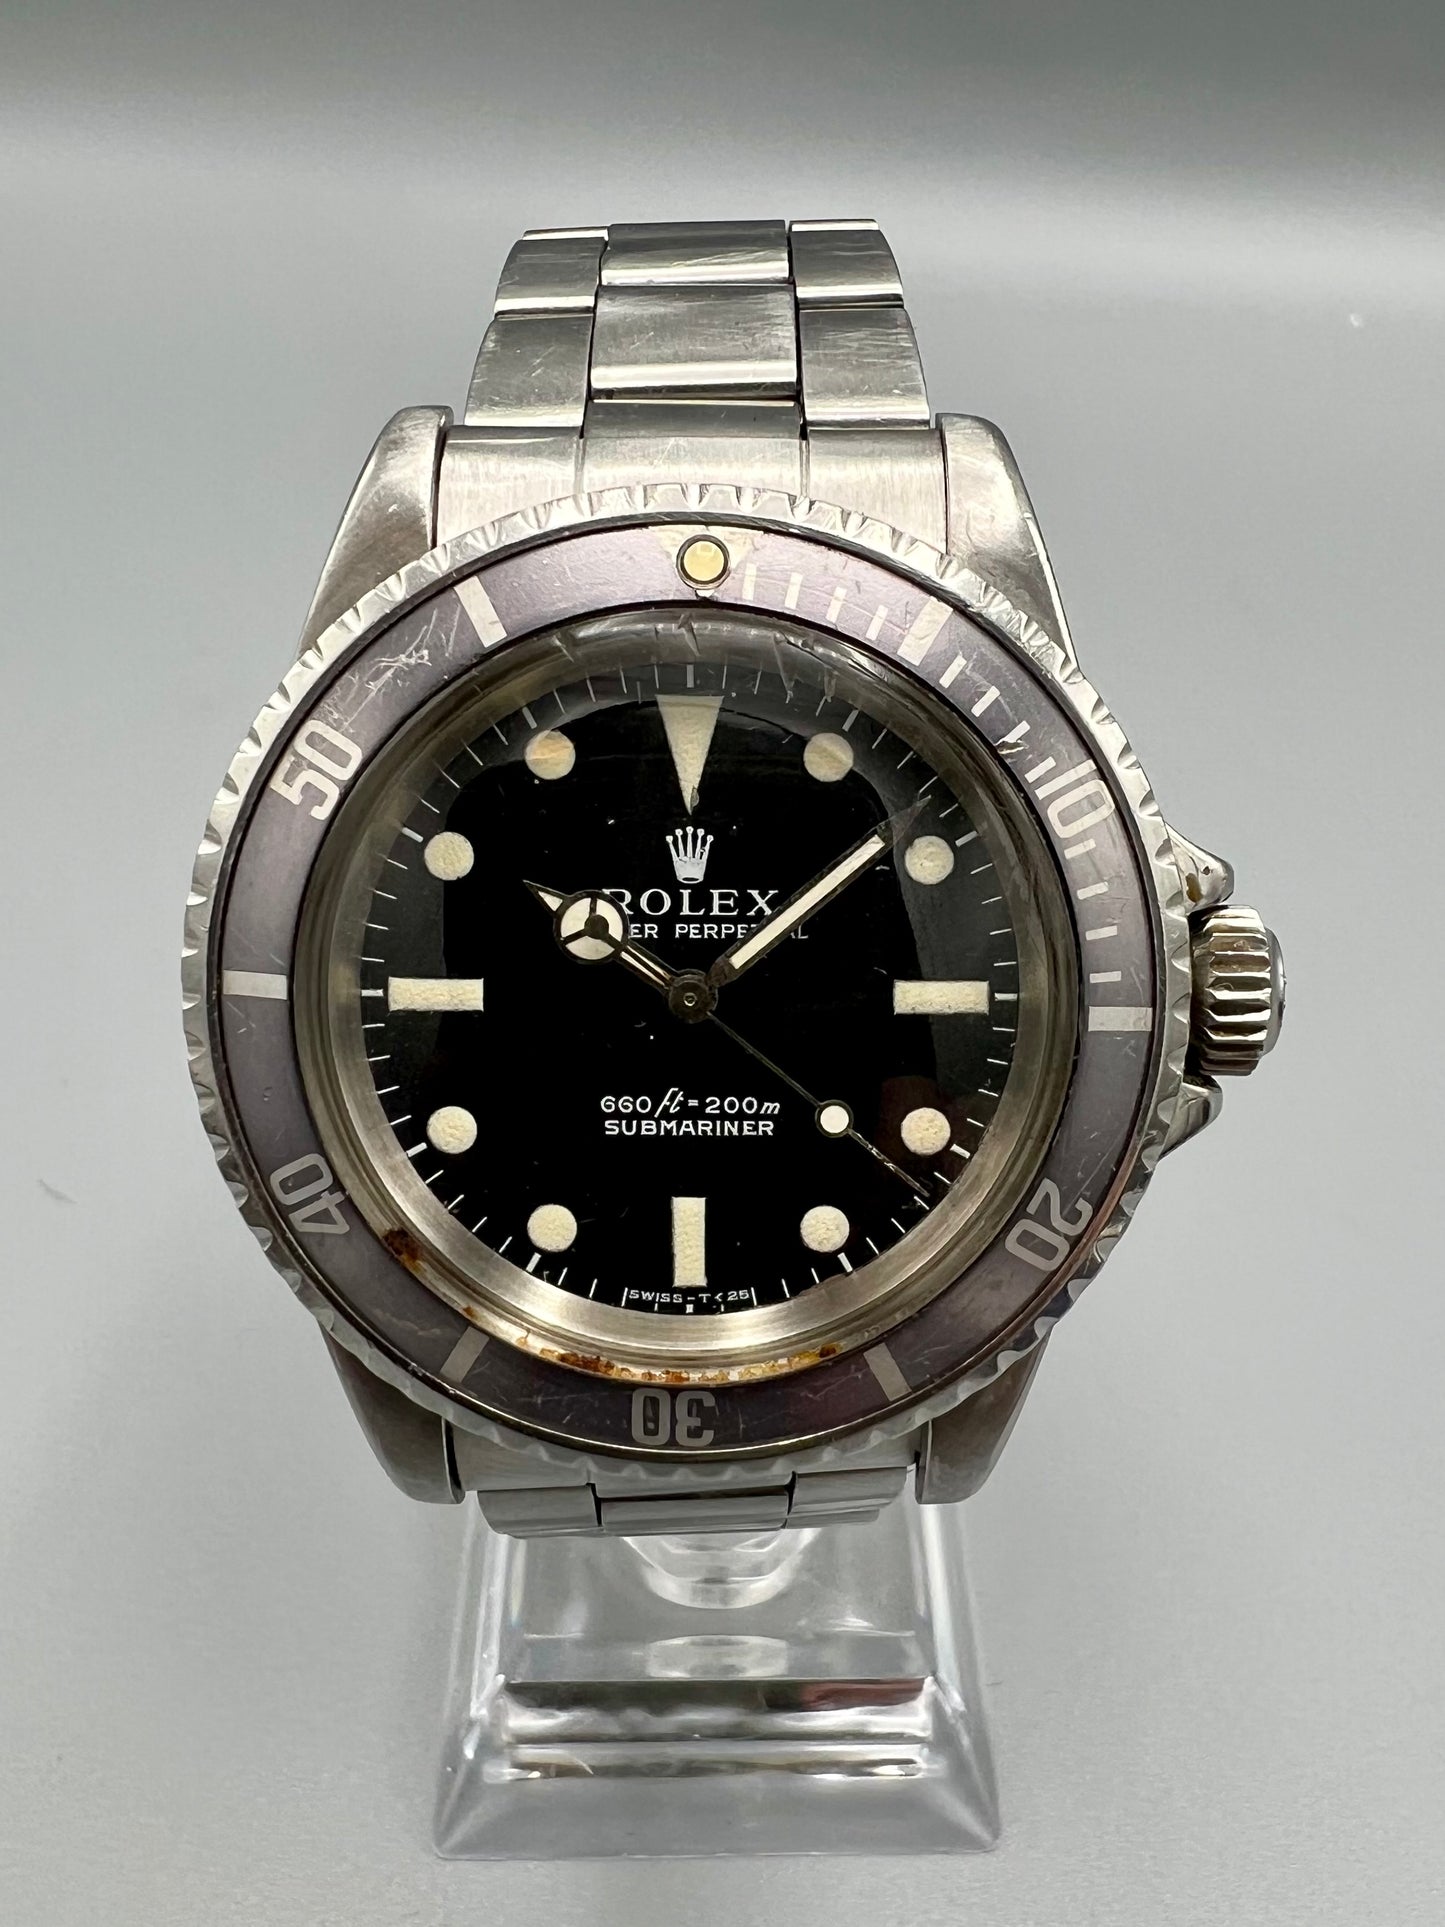 Rolex Ref 5513 Submariner COMEX, RARE early model, with helium escape valve, ghost bezel, 1971